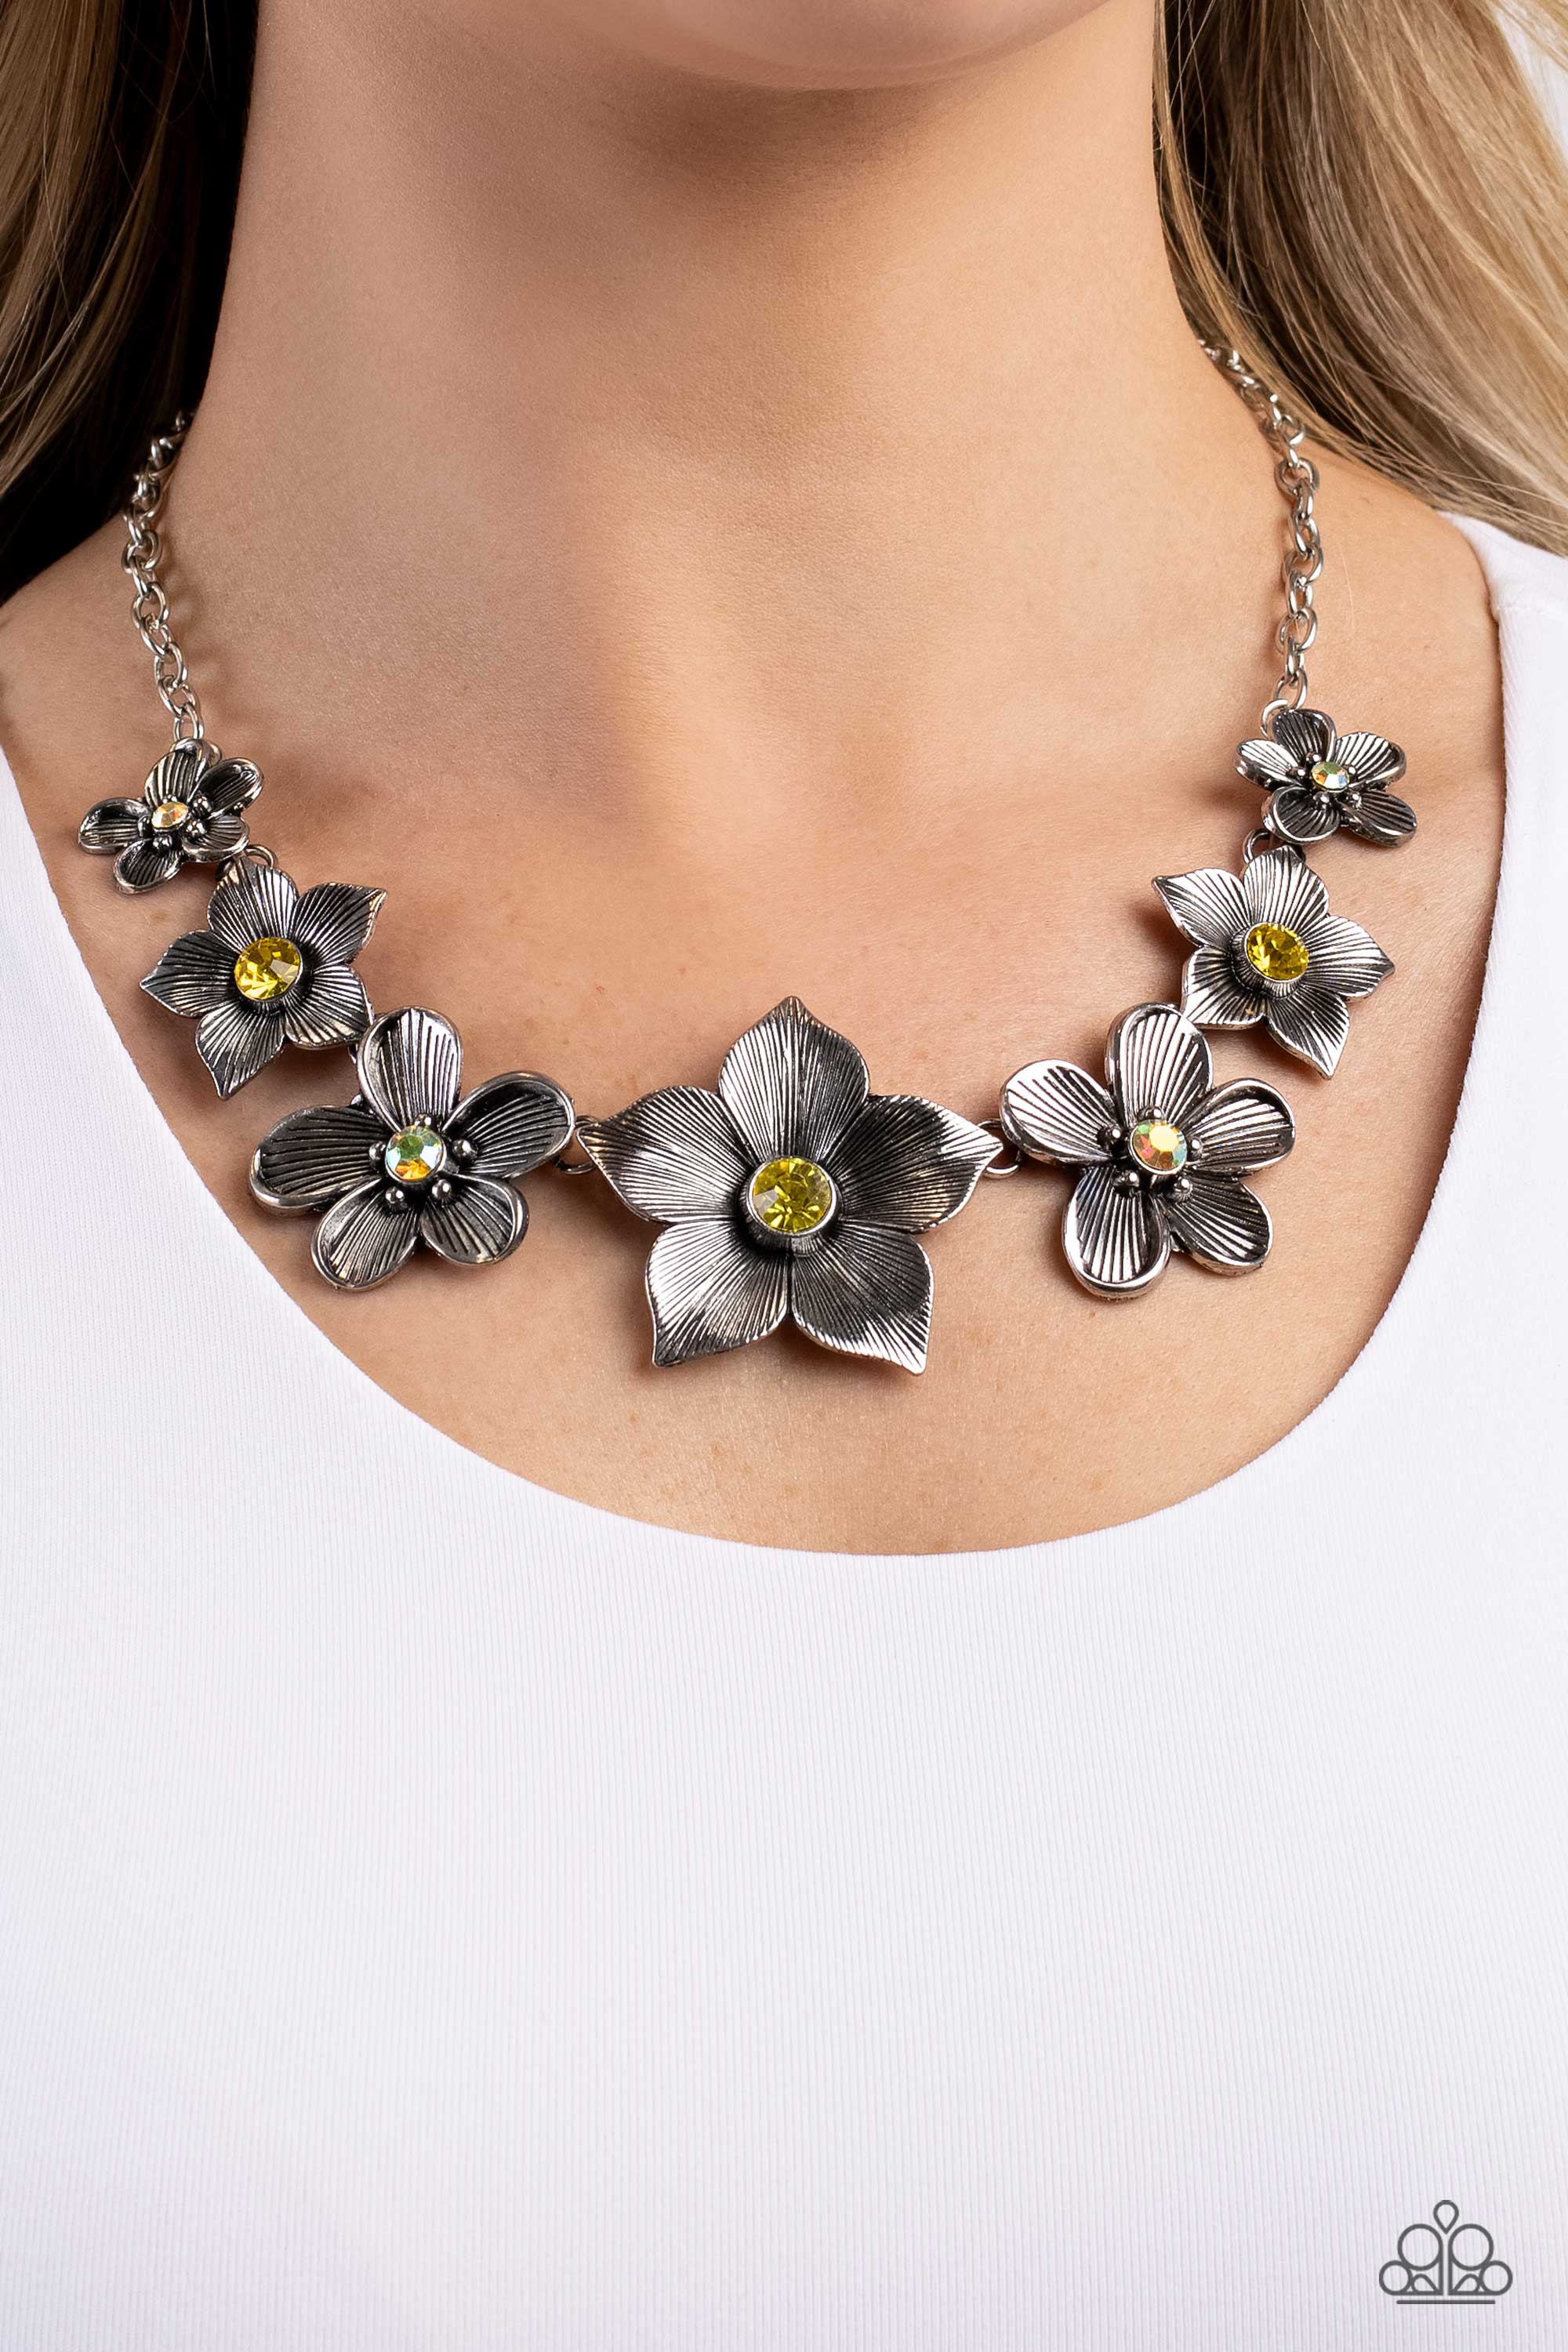 Free FLORAL Yellow Flower Necklace - Paparazzi Accessories- lightbox - CarasShop.com - $5 Jewelry by Cara Jewels